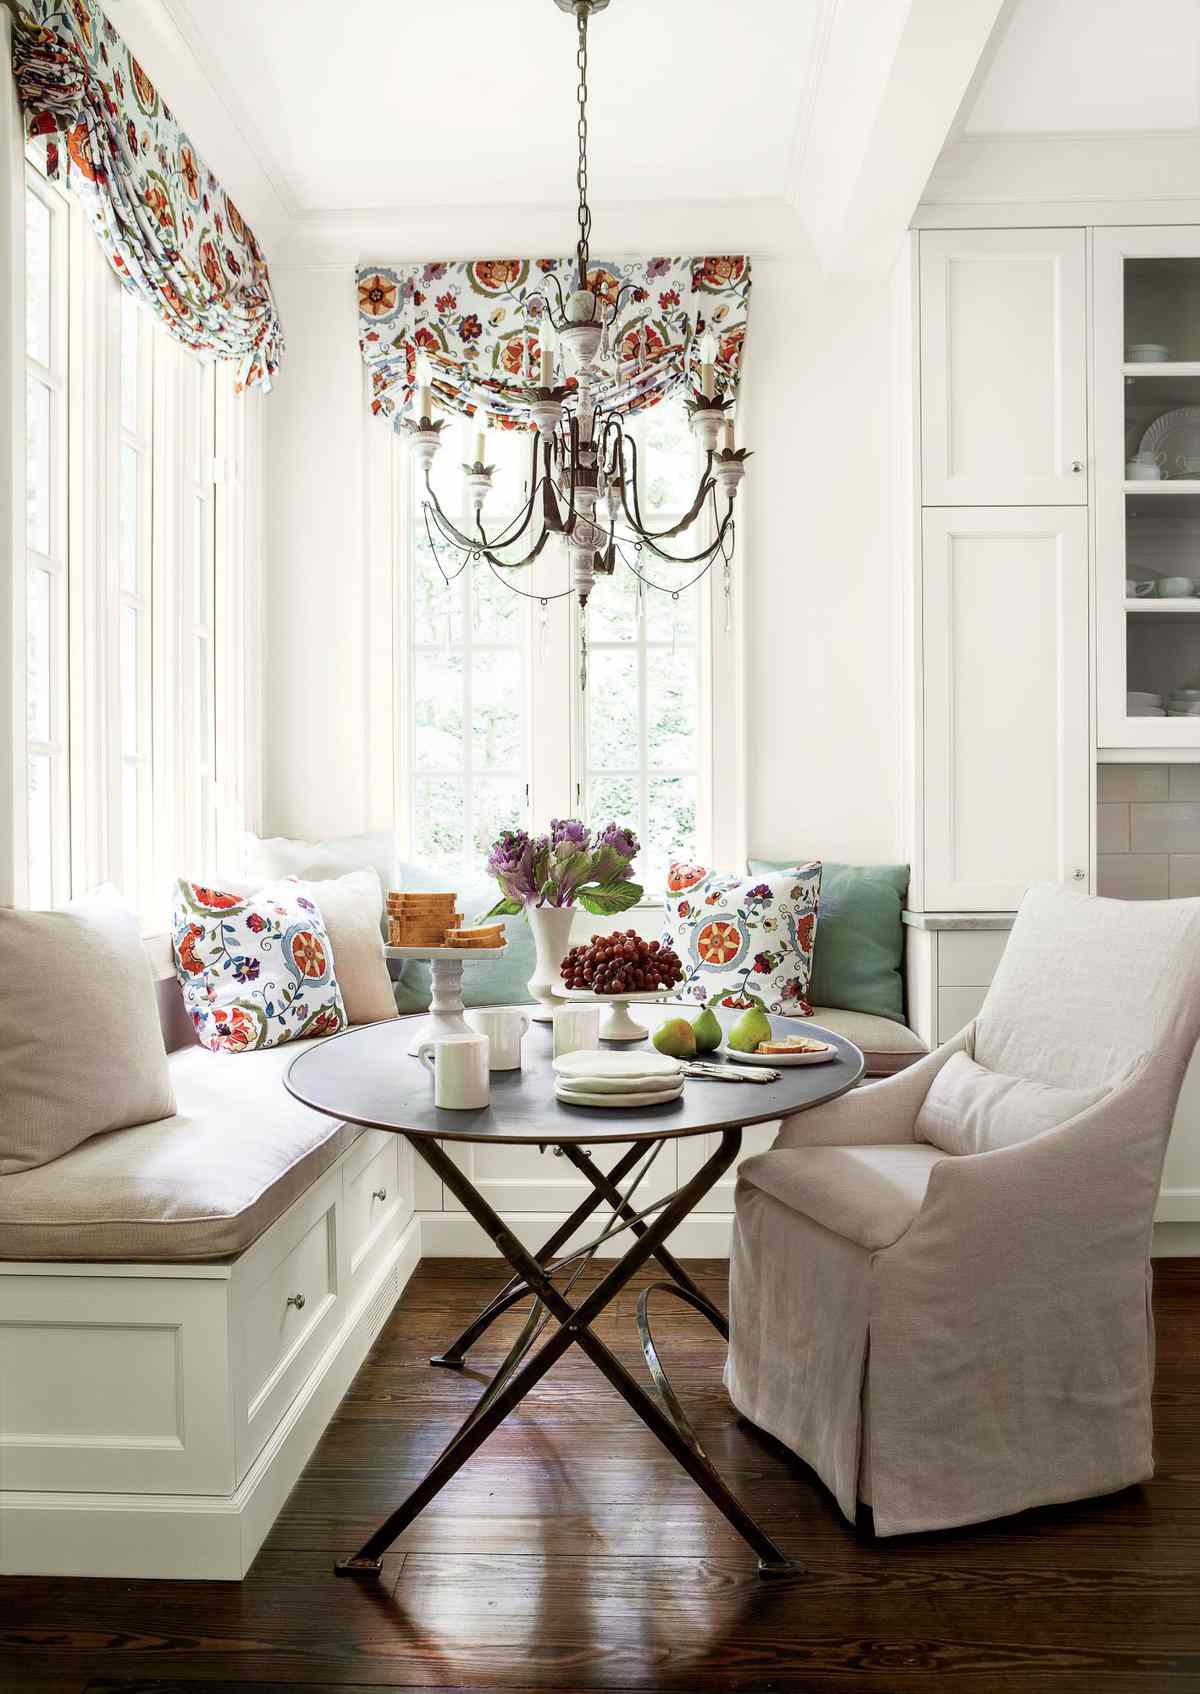 Kitchen Banquette Seating Is Trending For 2019 Southern Living